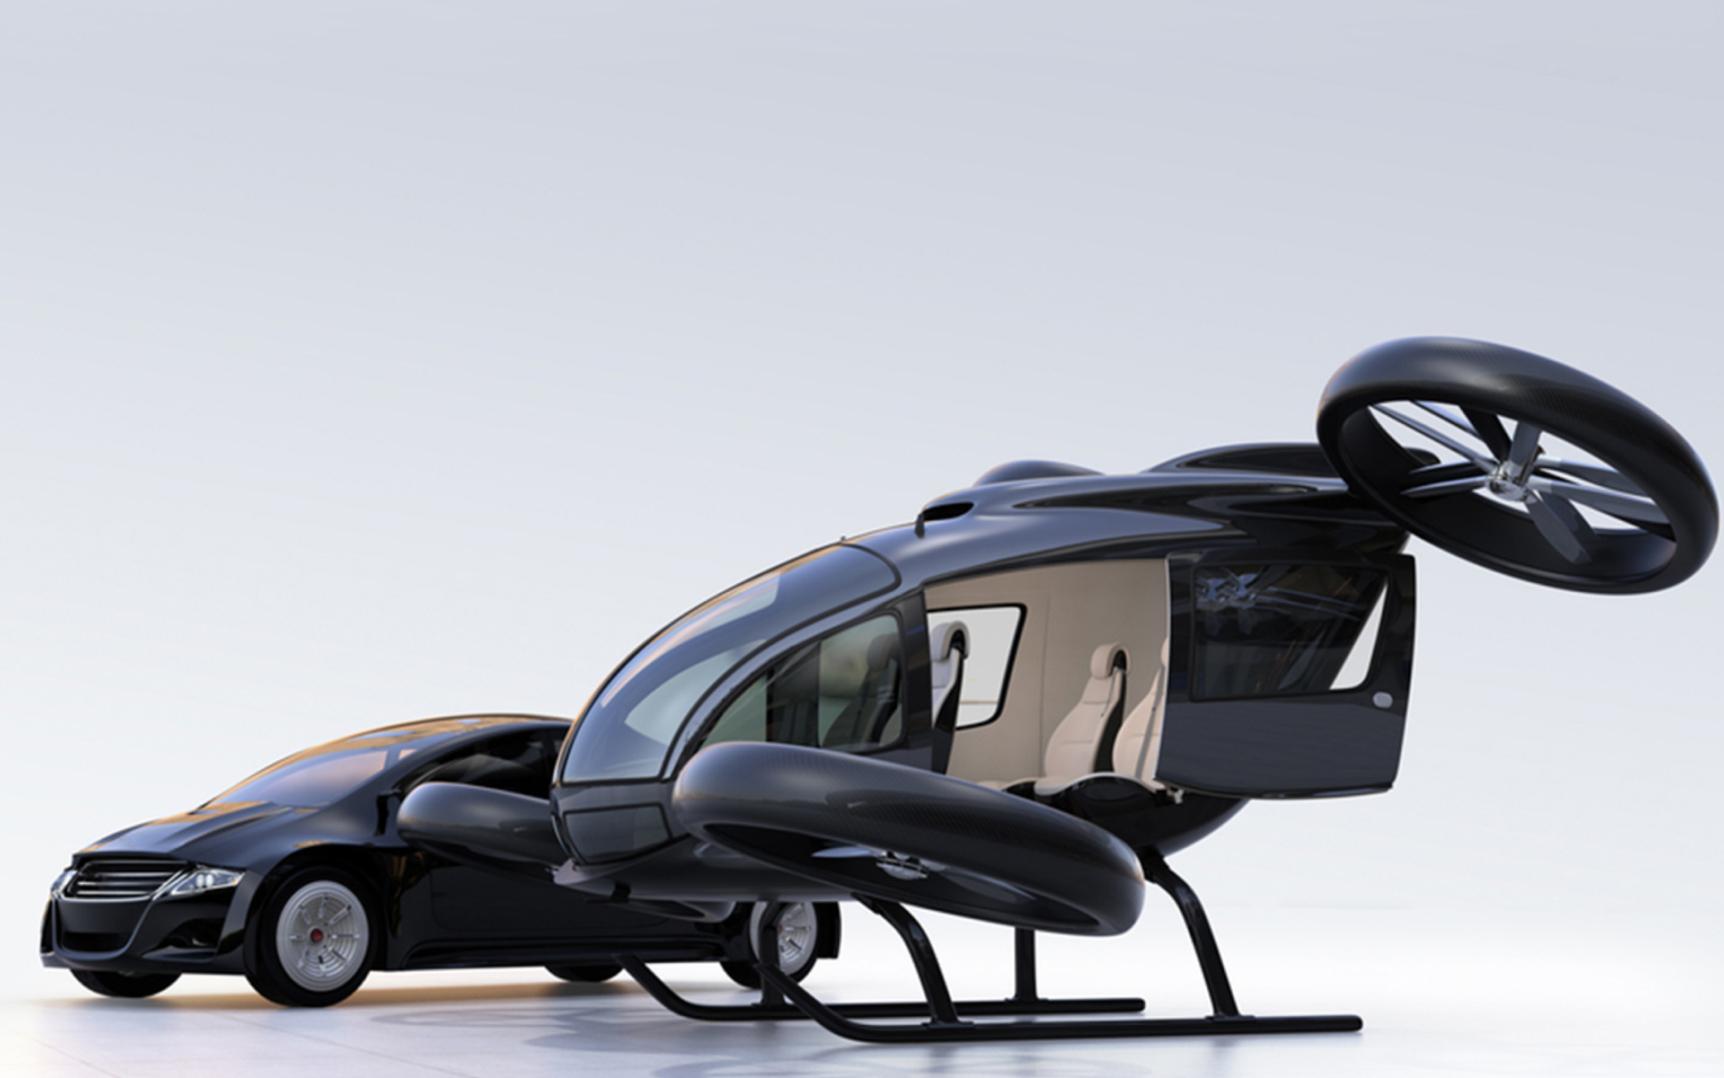 passenger-drone-technology-and-flying-cars-keyvisual